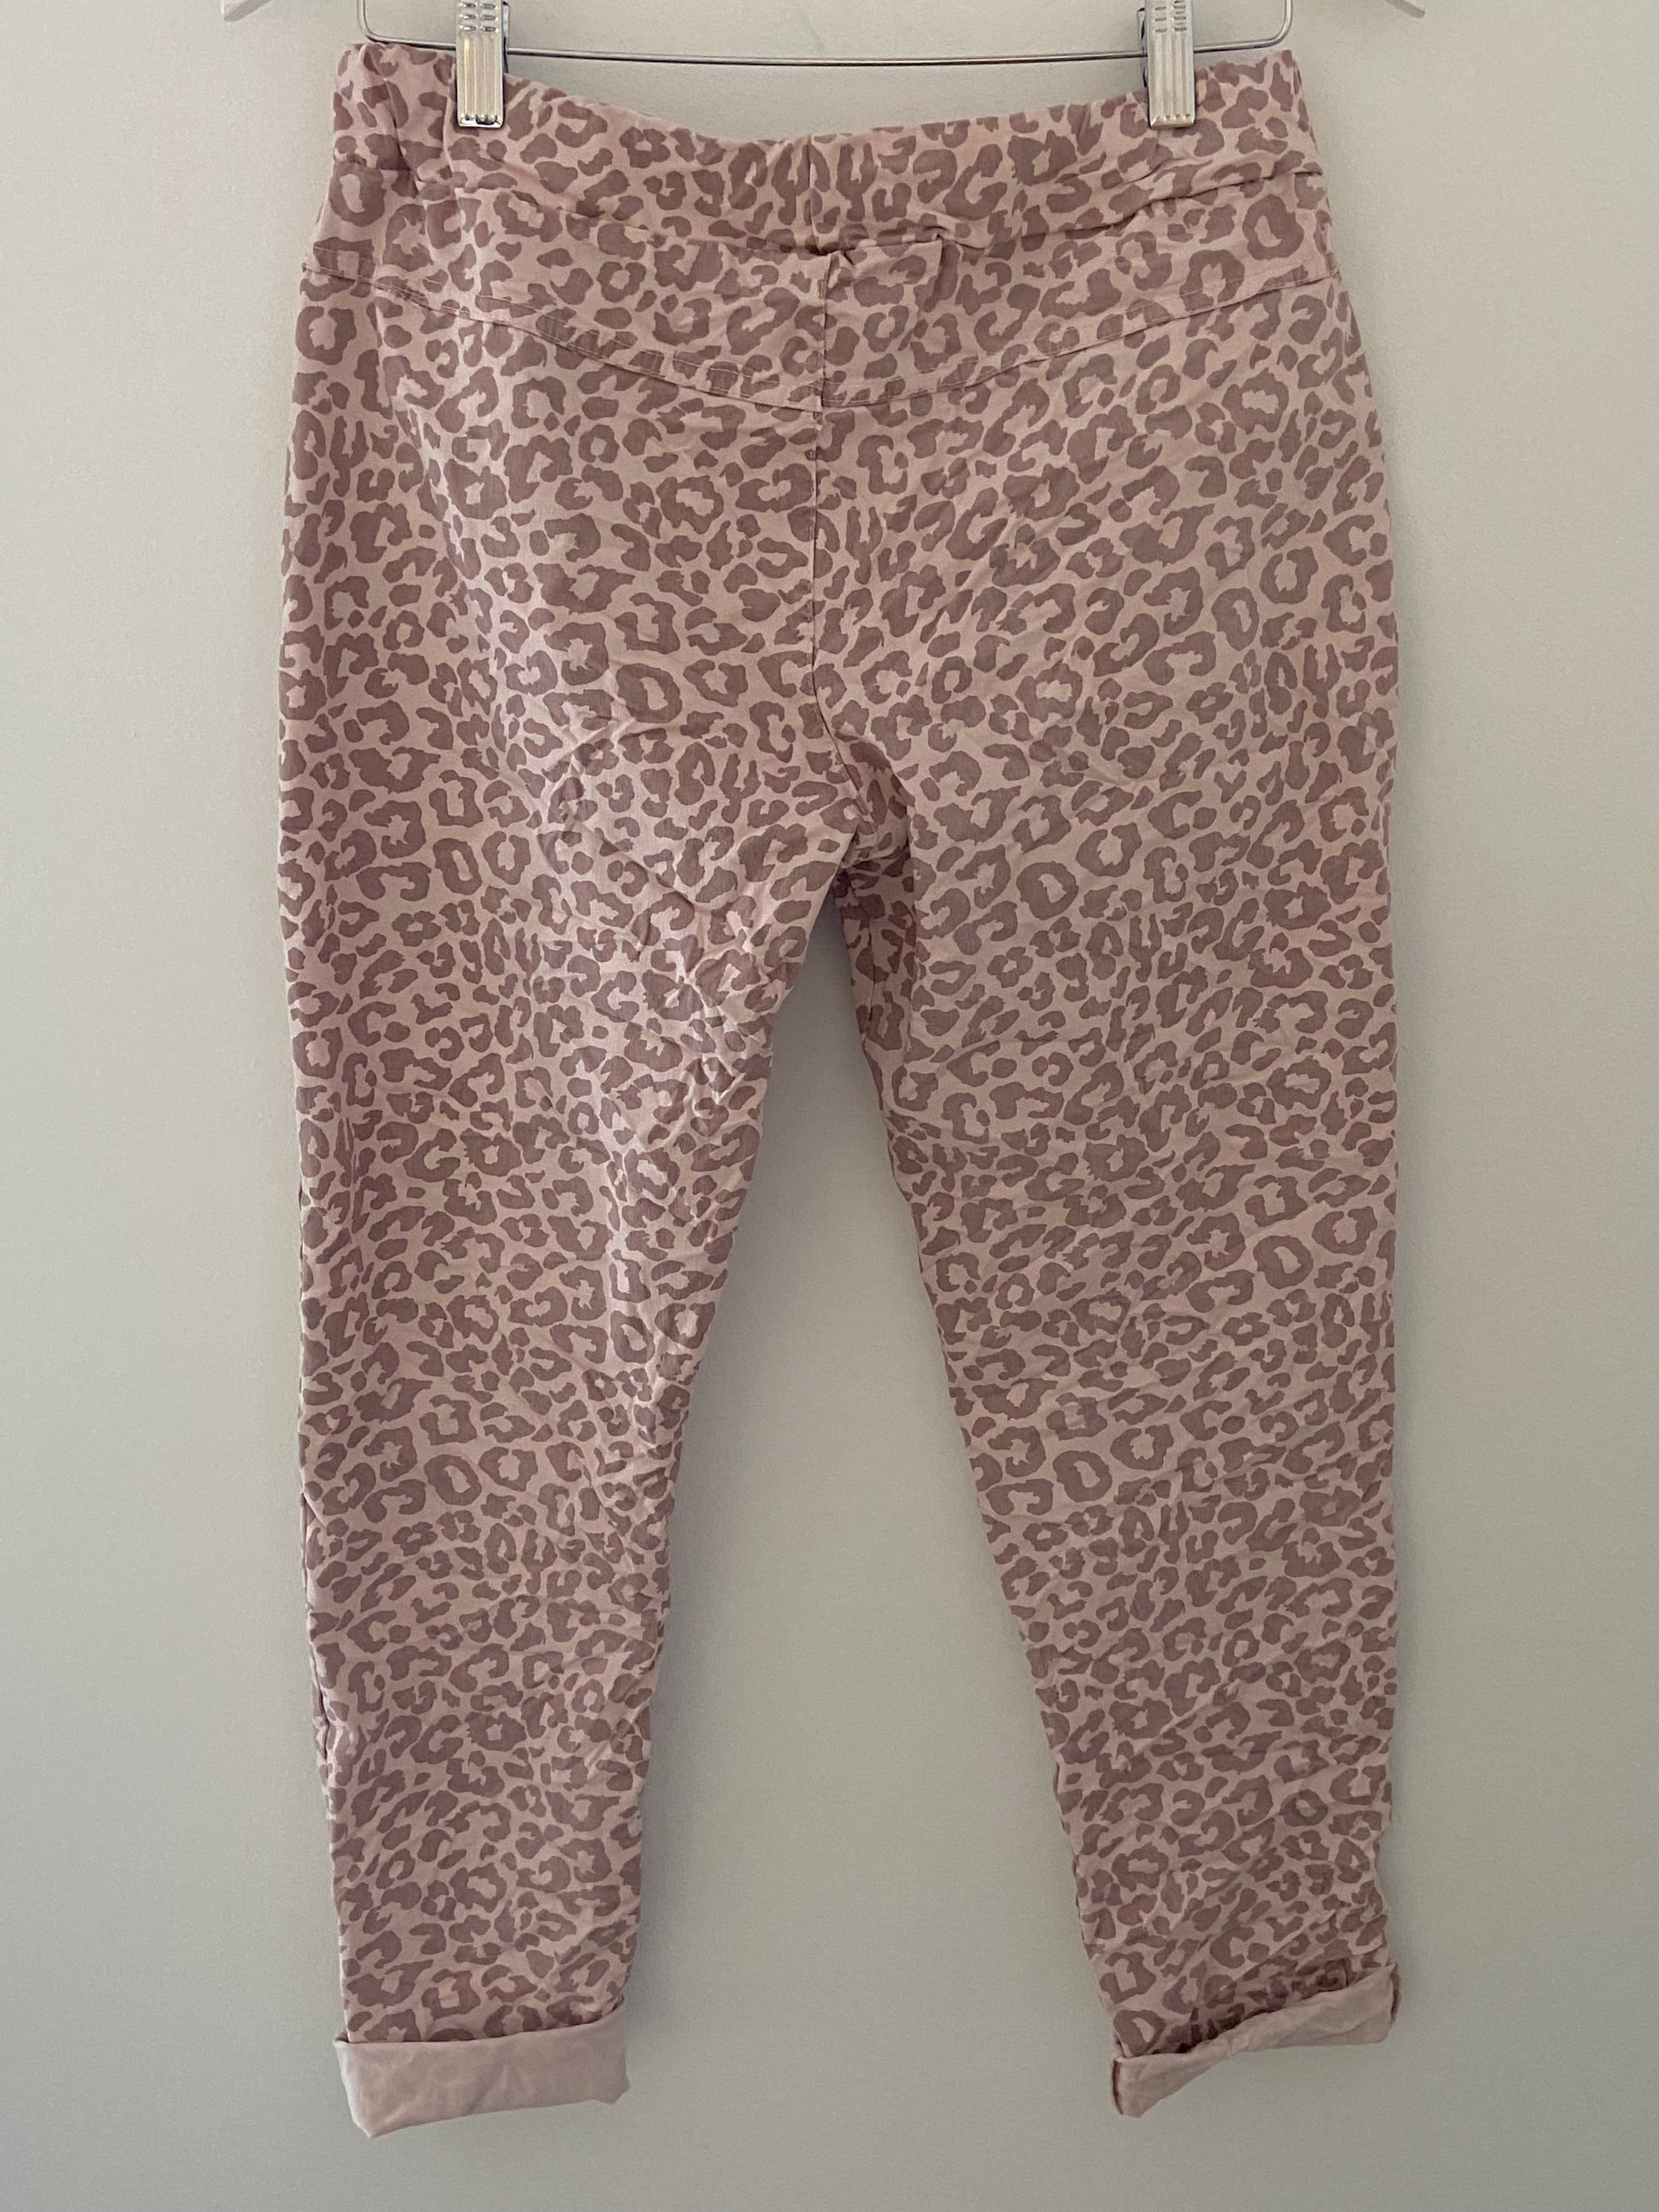 Slimfit Cotton Stretch Joggers in Pink Leopard